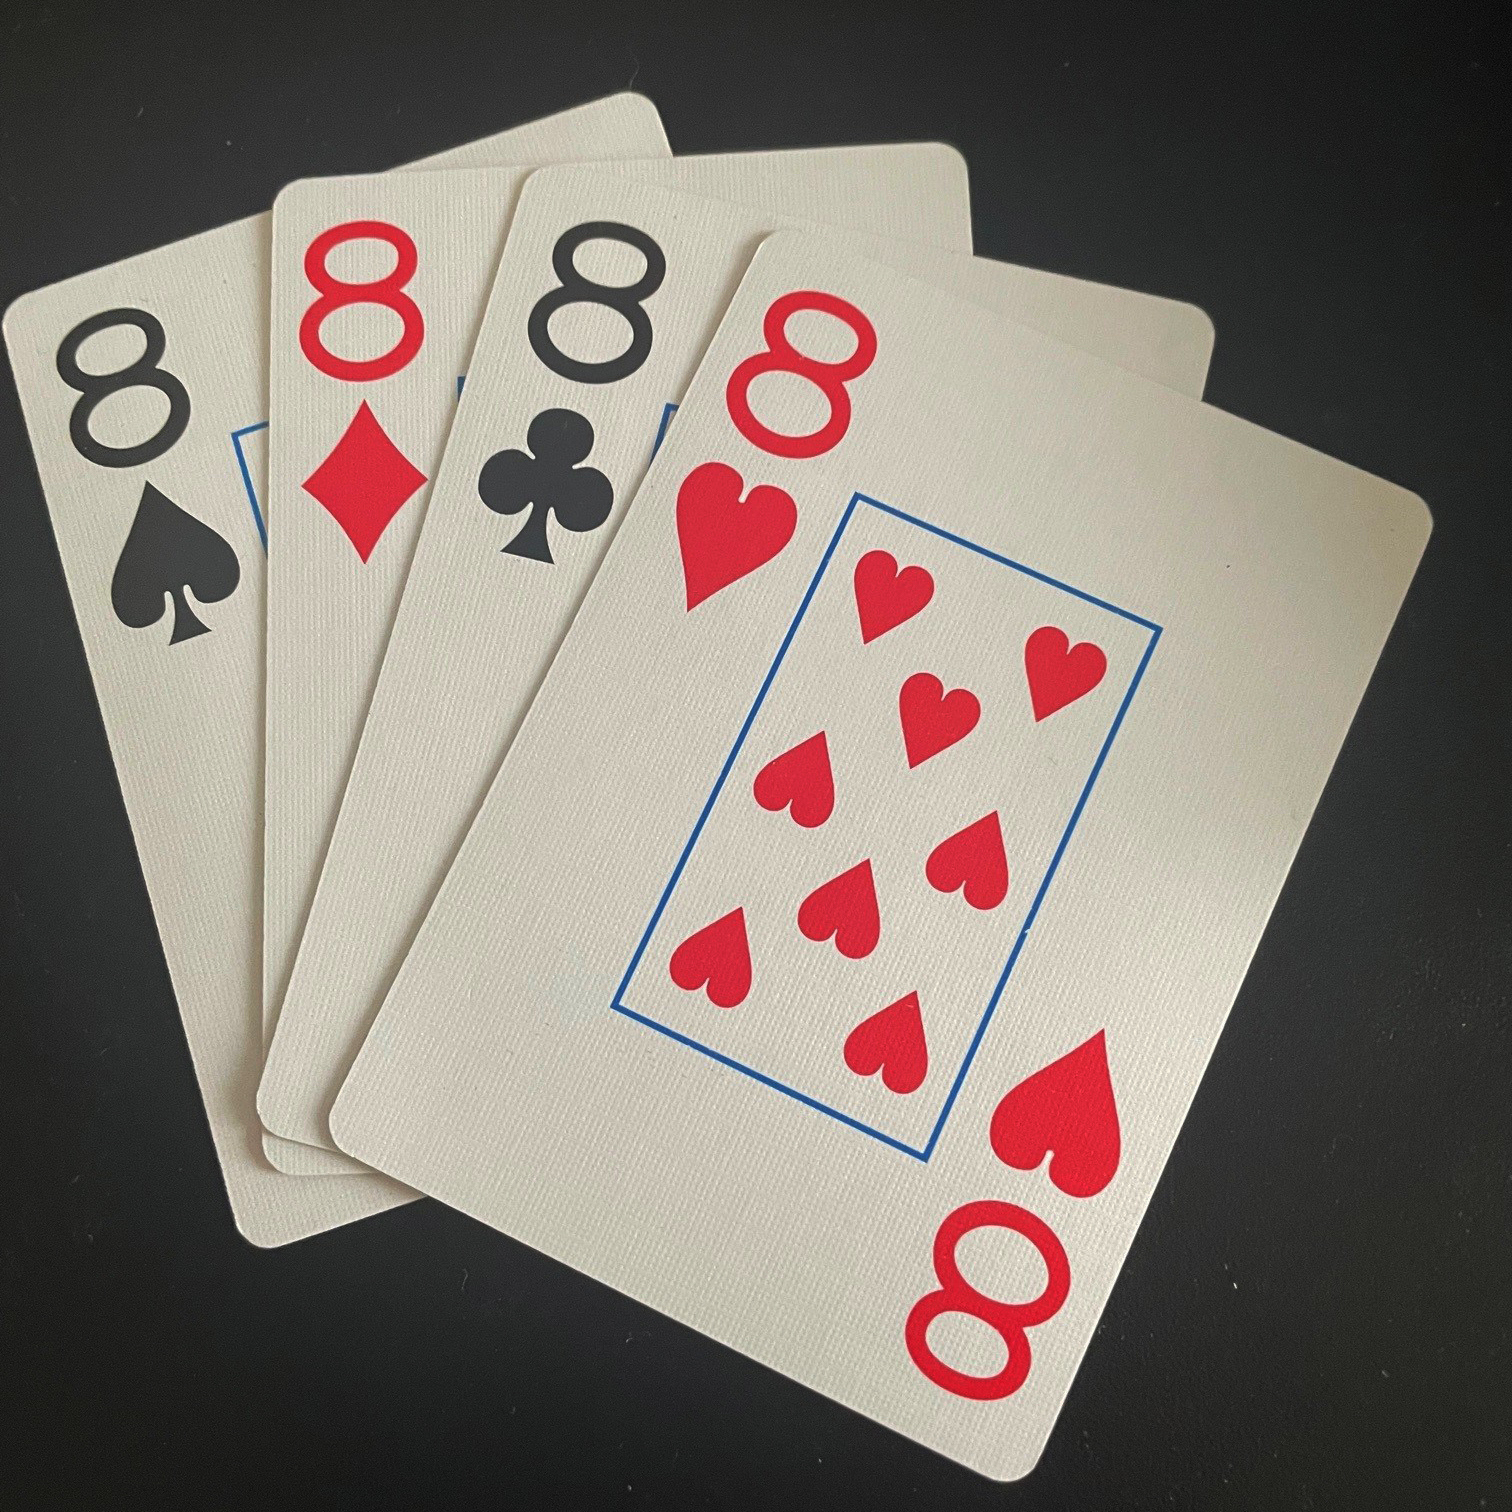 The four 8's in a standard deck of cards